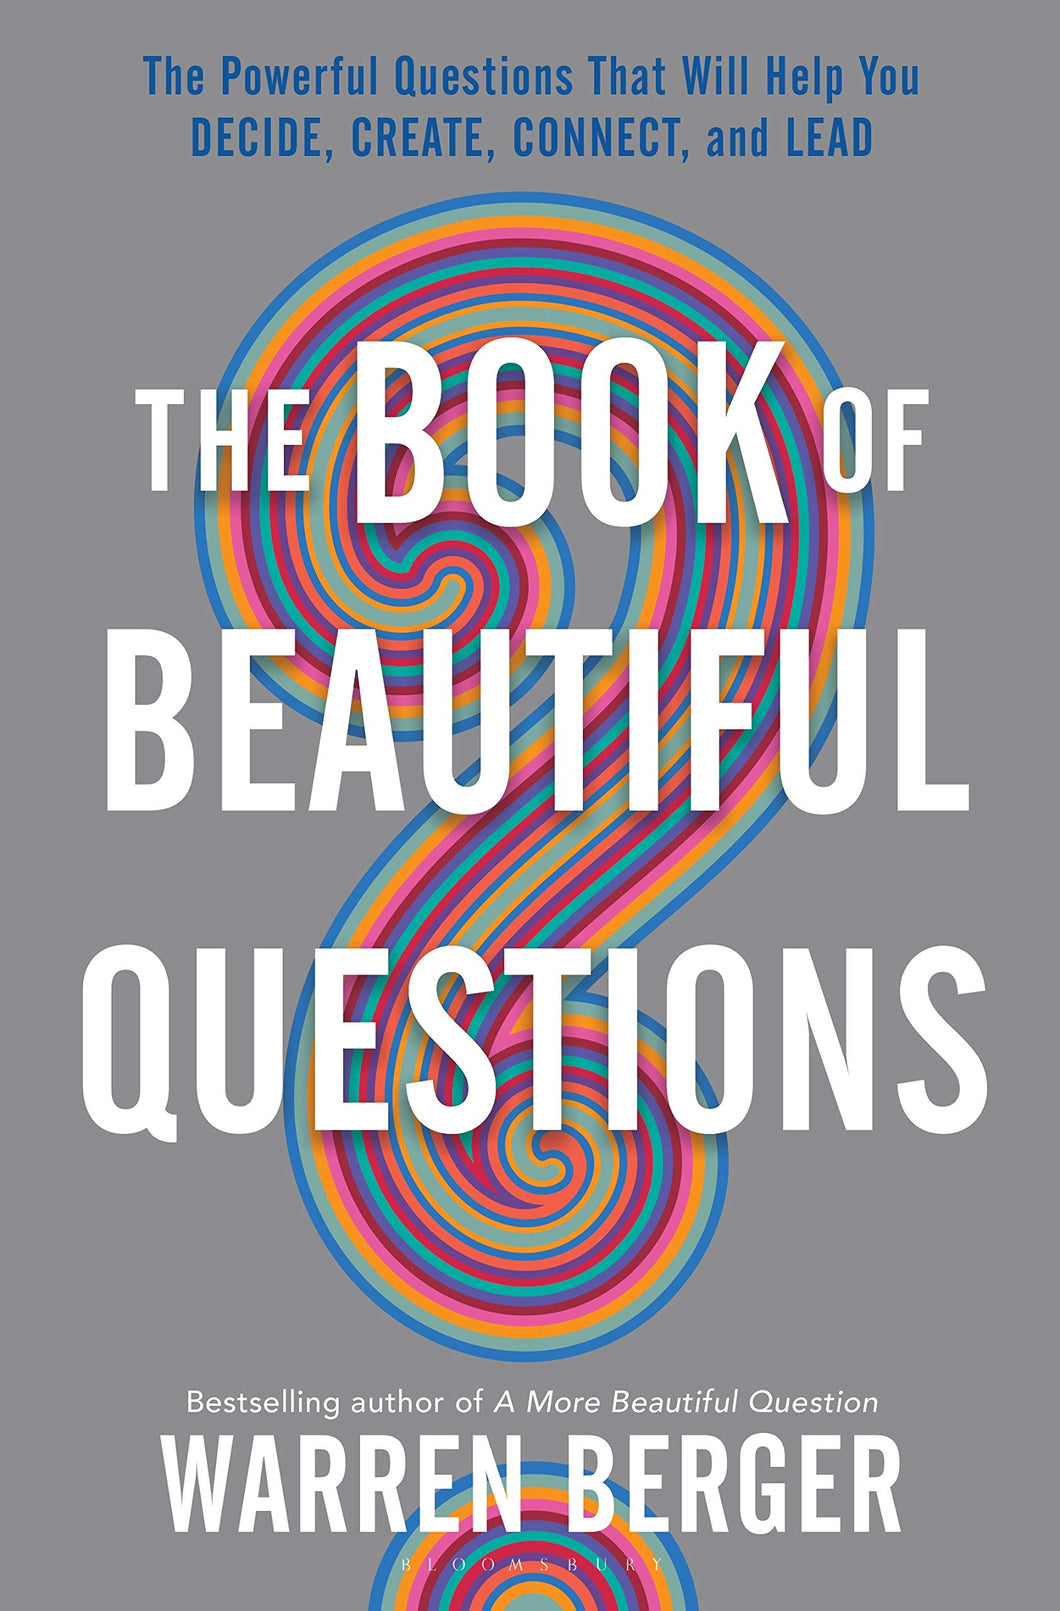 the big book of beautiful questions warren berger demanding smart decisions questions analyze learn move forward uncertainty questionologist complexity problems illuminating stories compelling research intrigue inquiry insights psychologists innovators effective leaders creative thinkers decision making creativity leadership relationship bloomsbury publishing raincoast books book